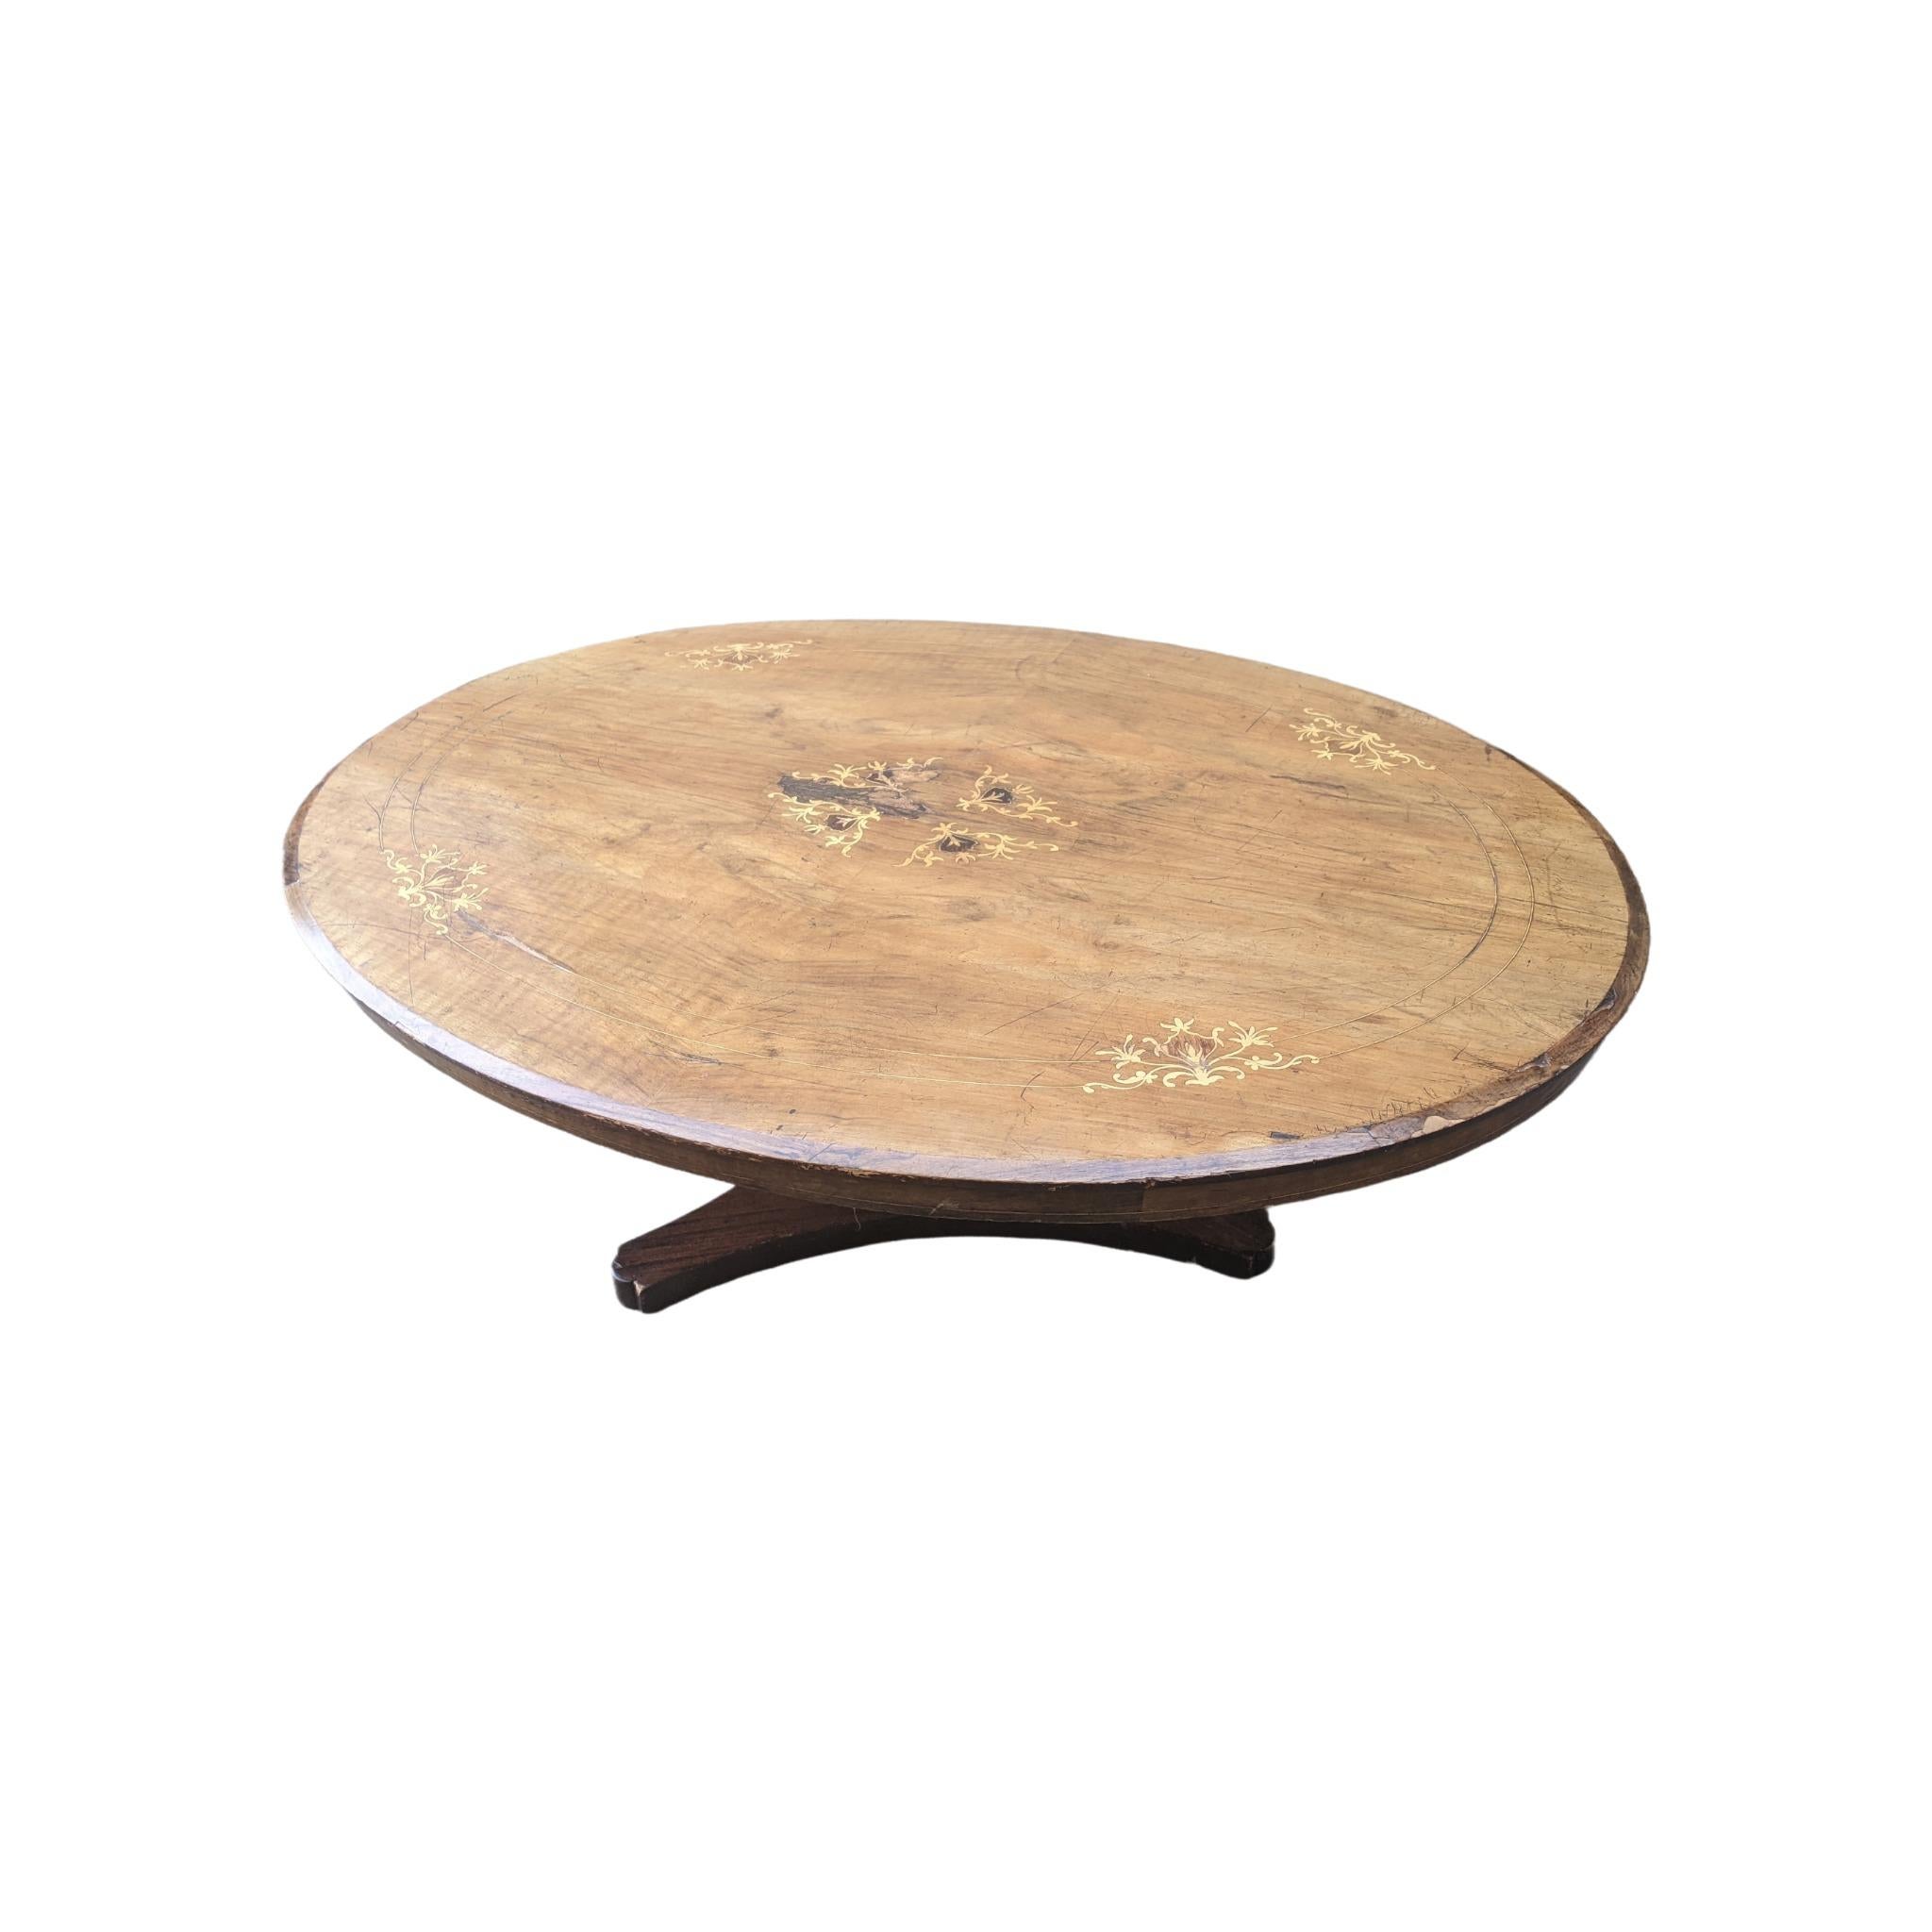 This stunning antique coffee table has been artfully reimagined from the base of an empire table and the top of a Victorian tilt top table. The result is striking, unusual, yet looks like it was meant to be.
33 lbs less